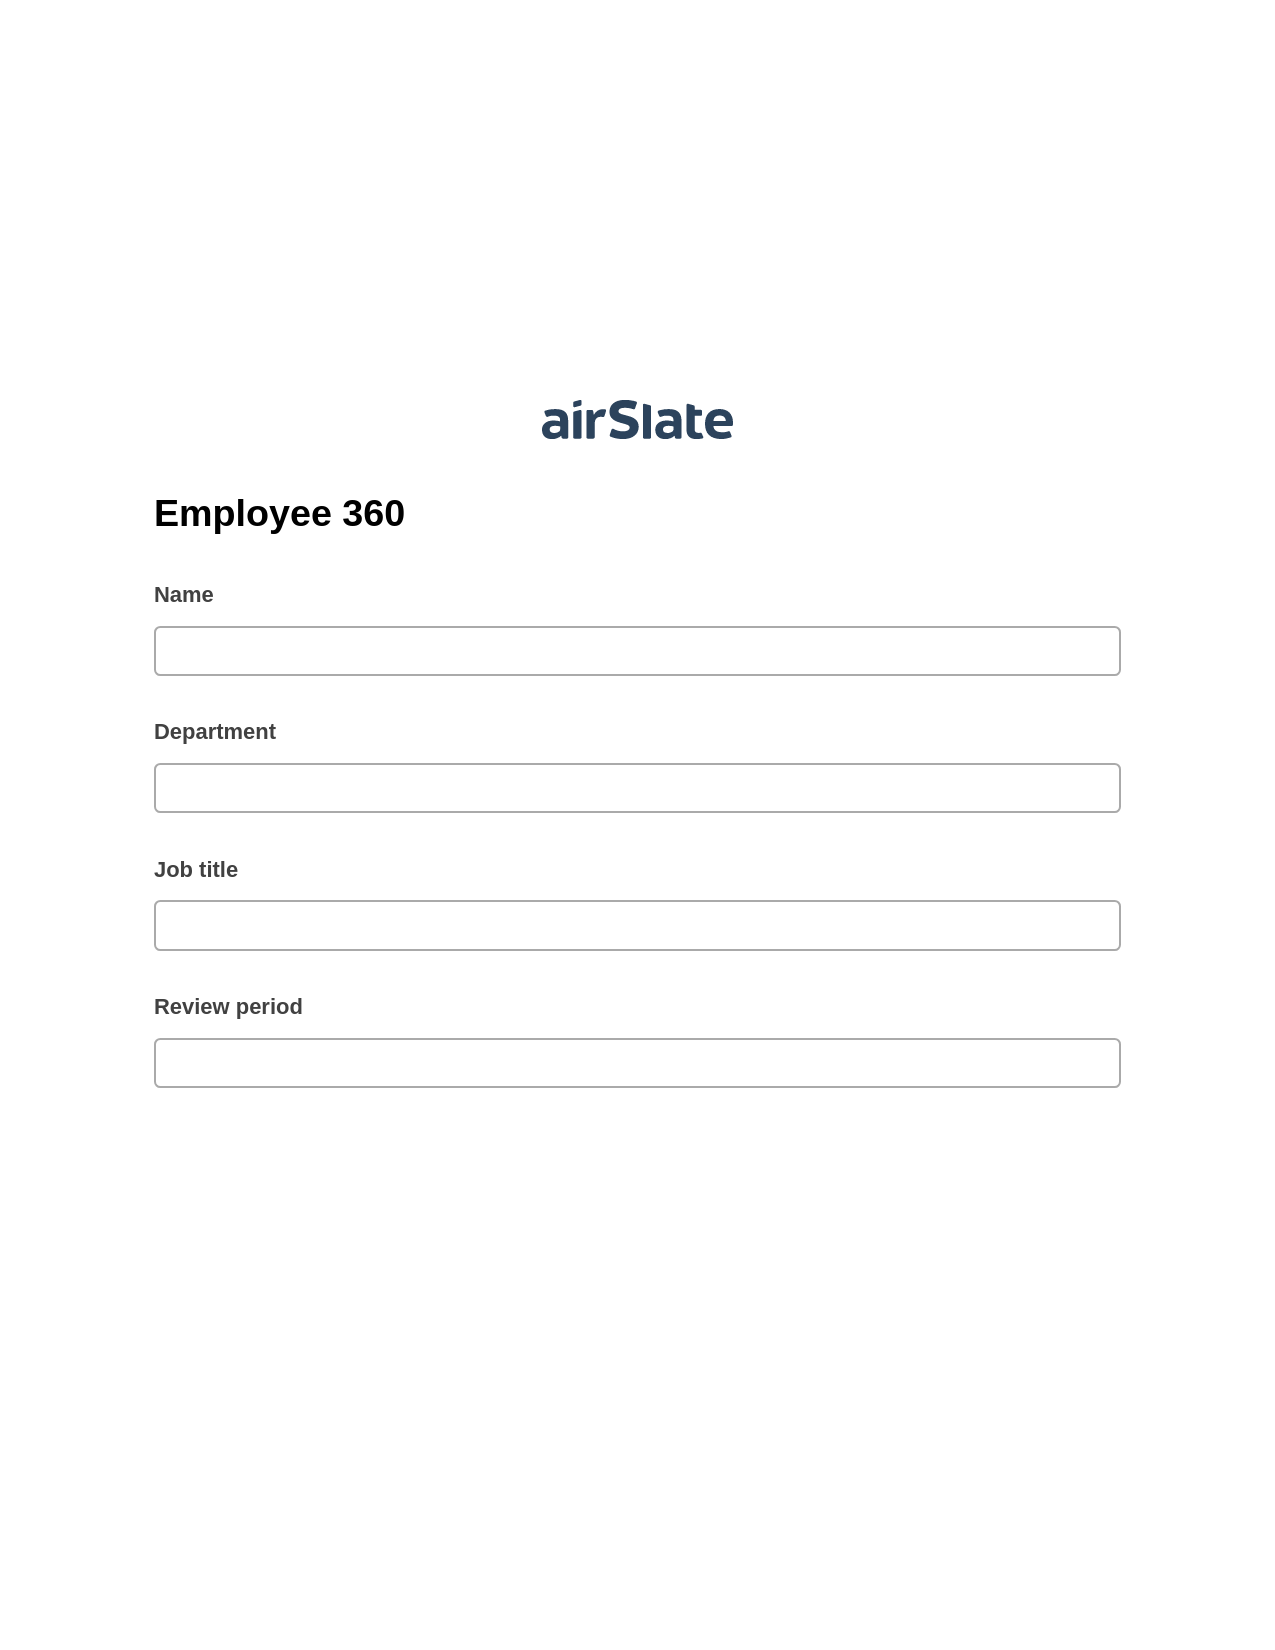 Multirole Employee 360 Pre-fill Dropdowns from Smartsheet Bot, Update MS Dynamics 365 Record Bot, Archive to Google Drive Bot